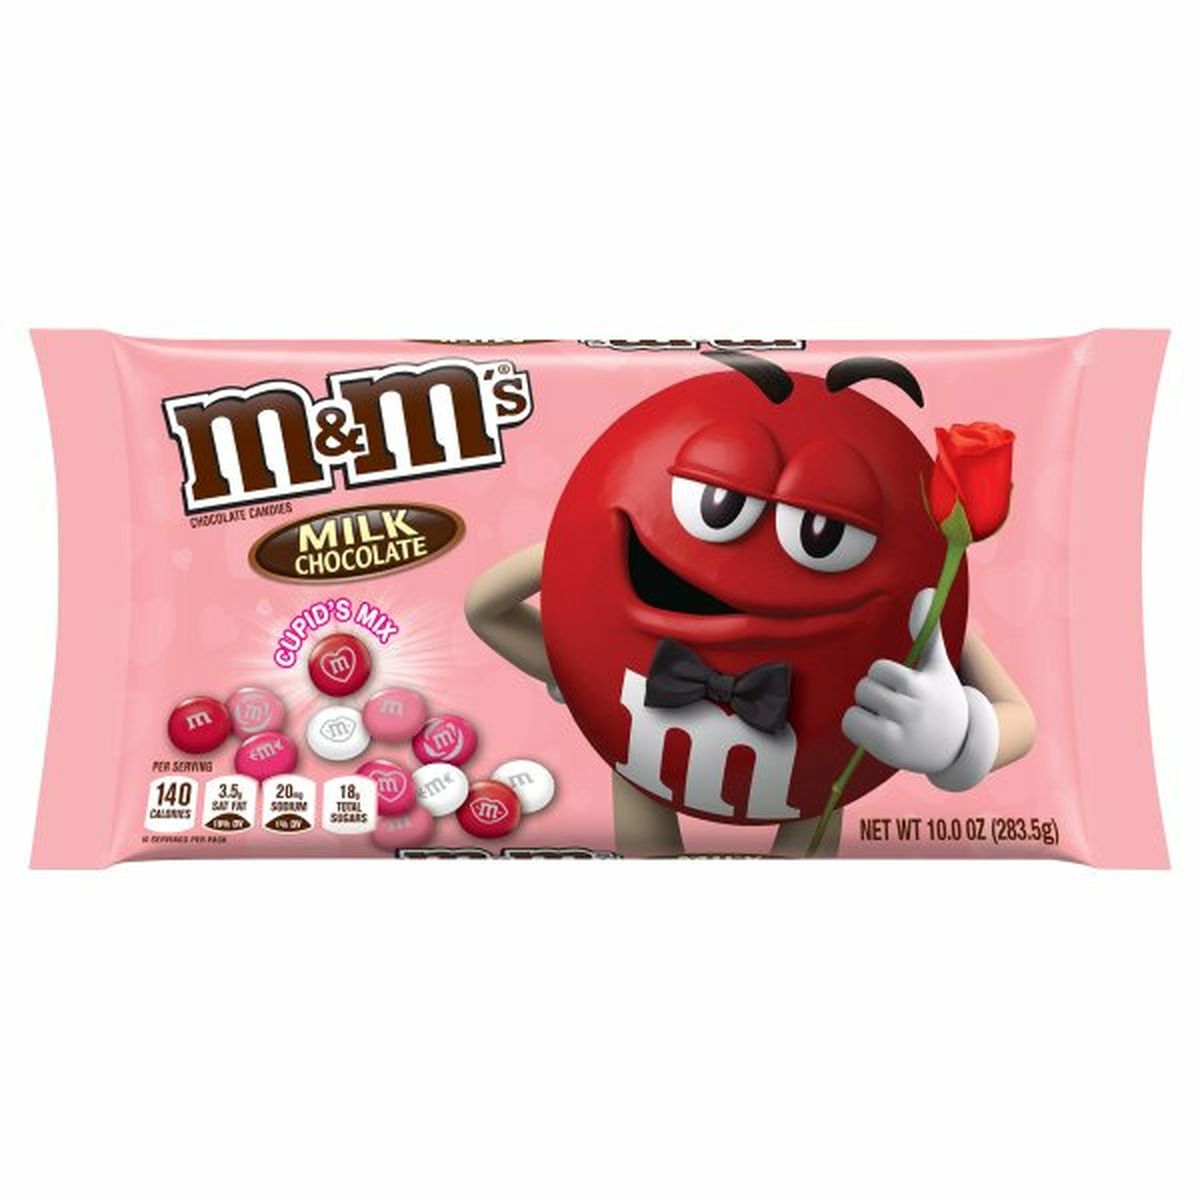 Calories in M&M's Cupid's Mix Milk Chocolate Valentine's Day Candy Bag